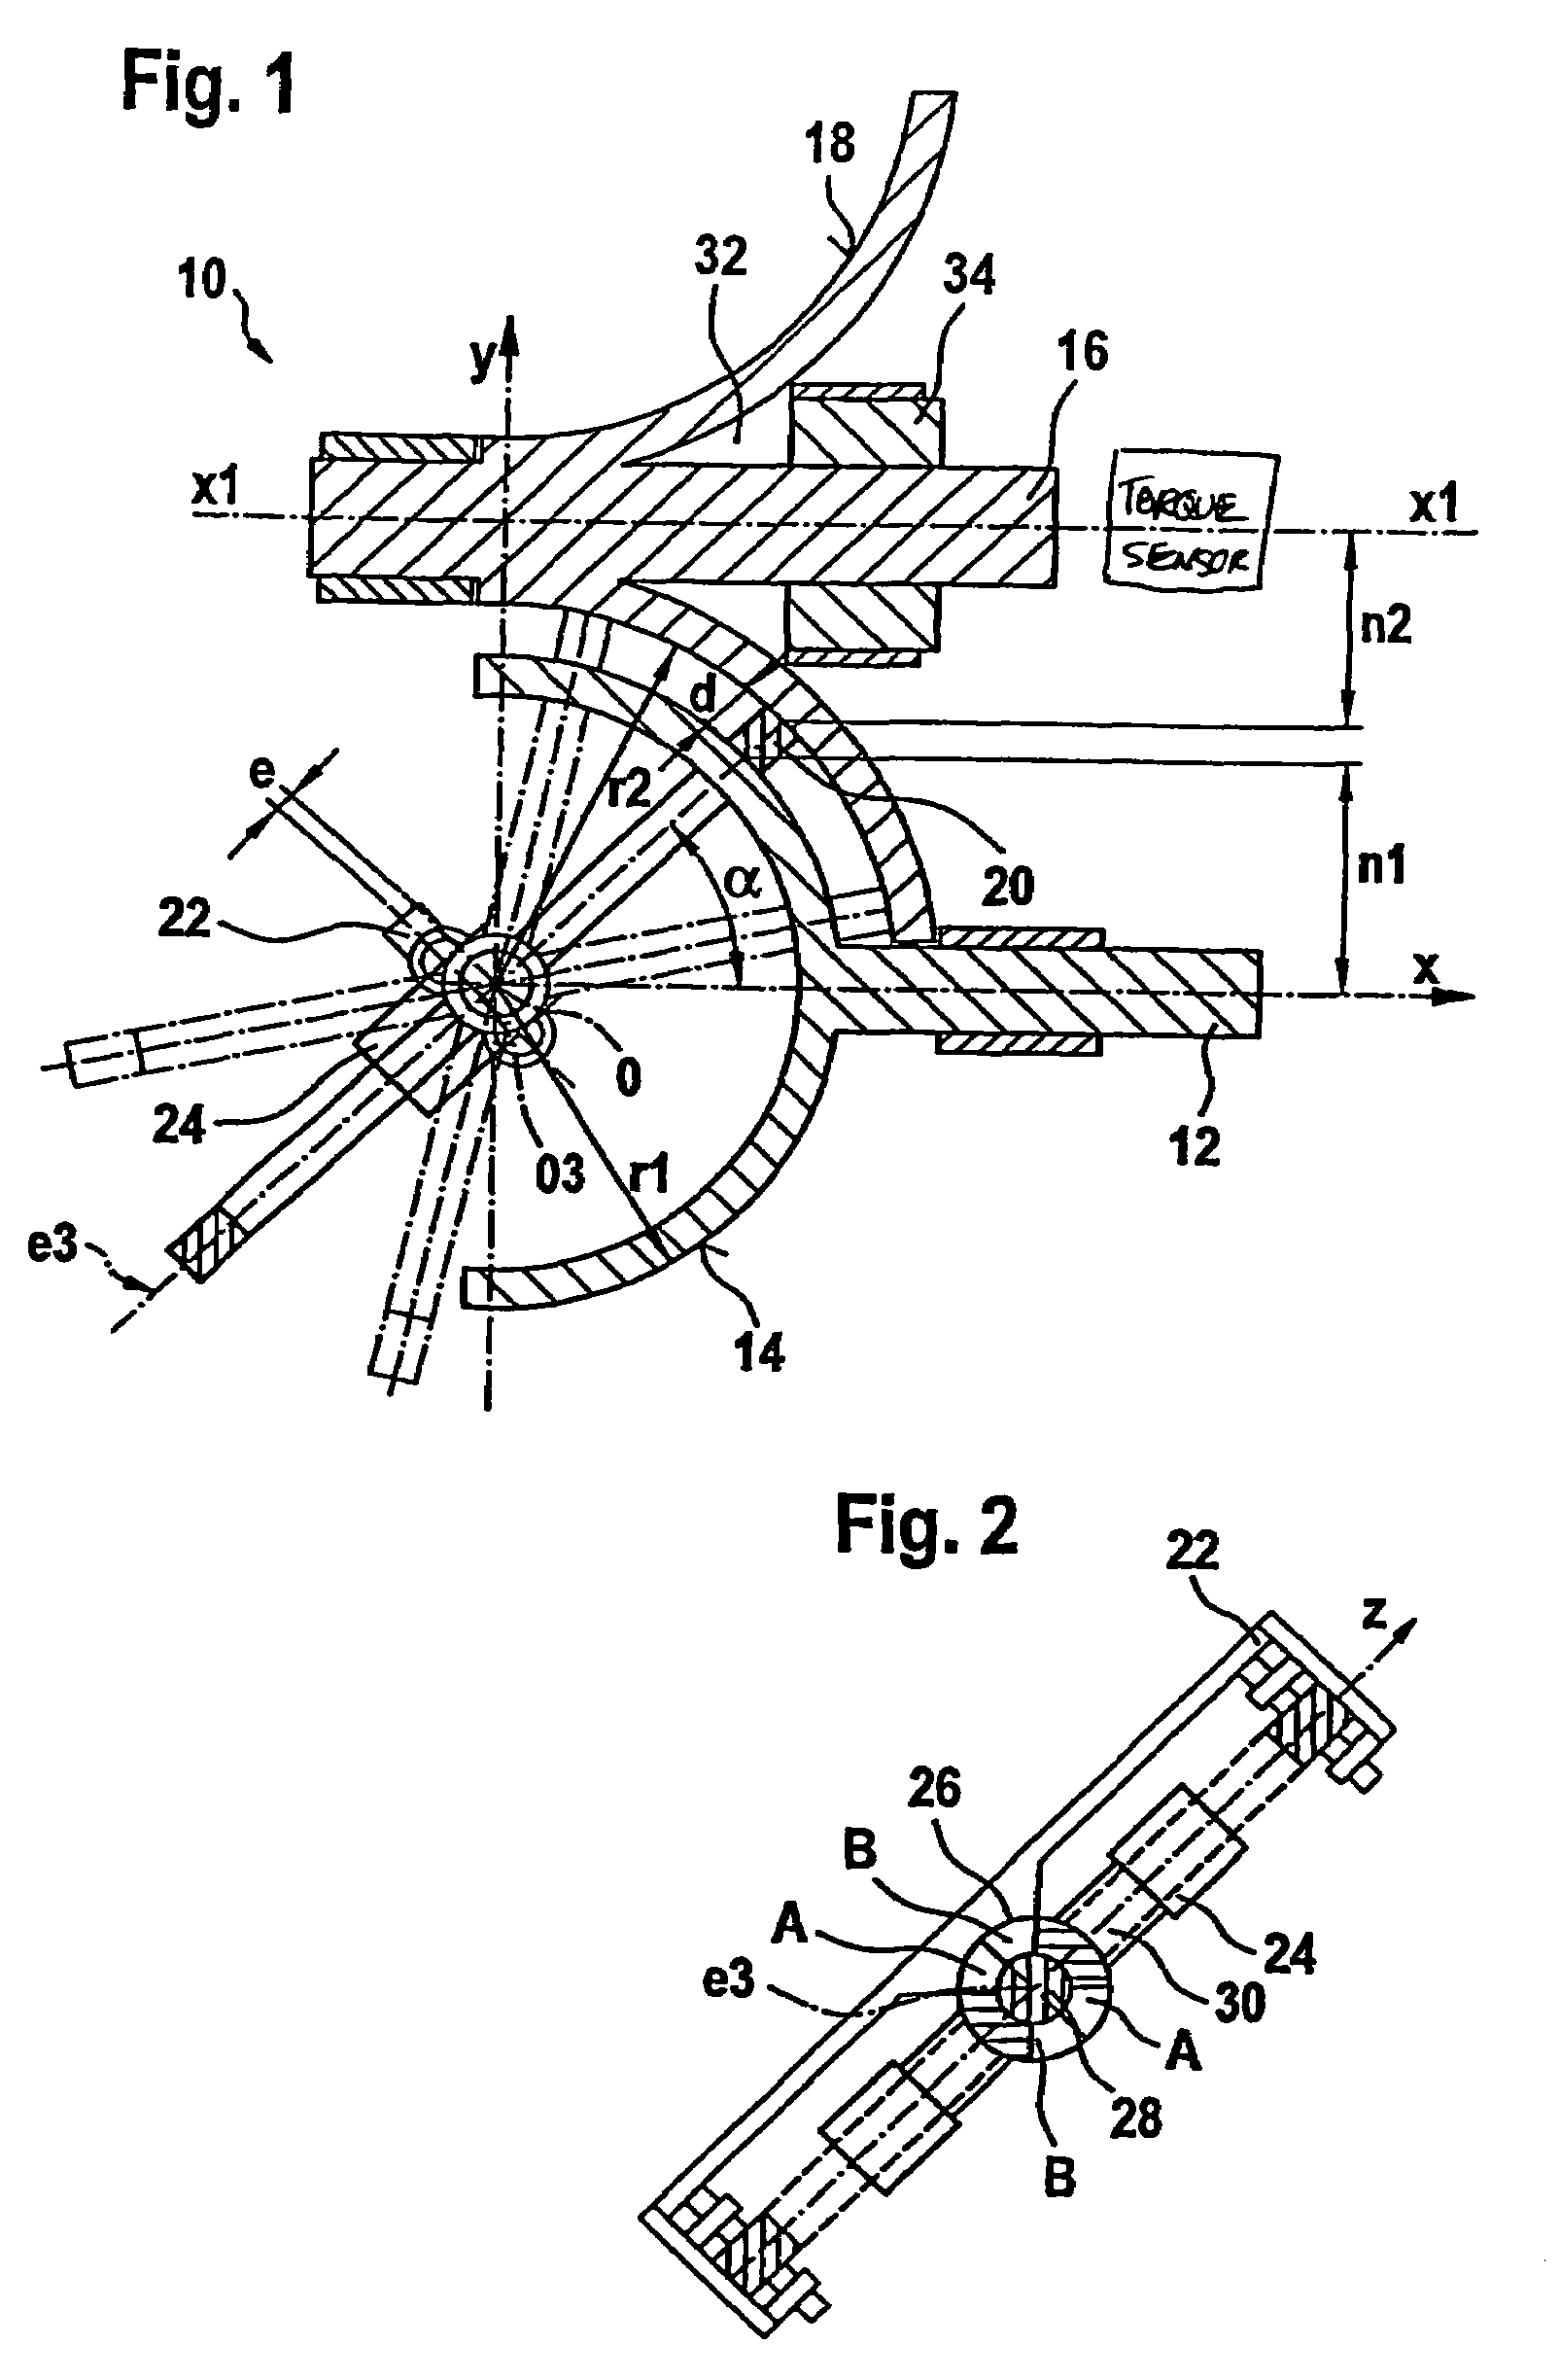 Variable speed drive for a continuously variable transmission